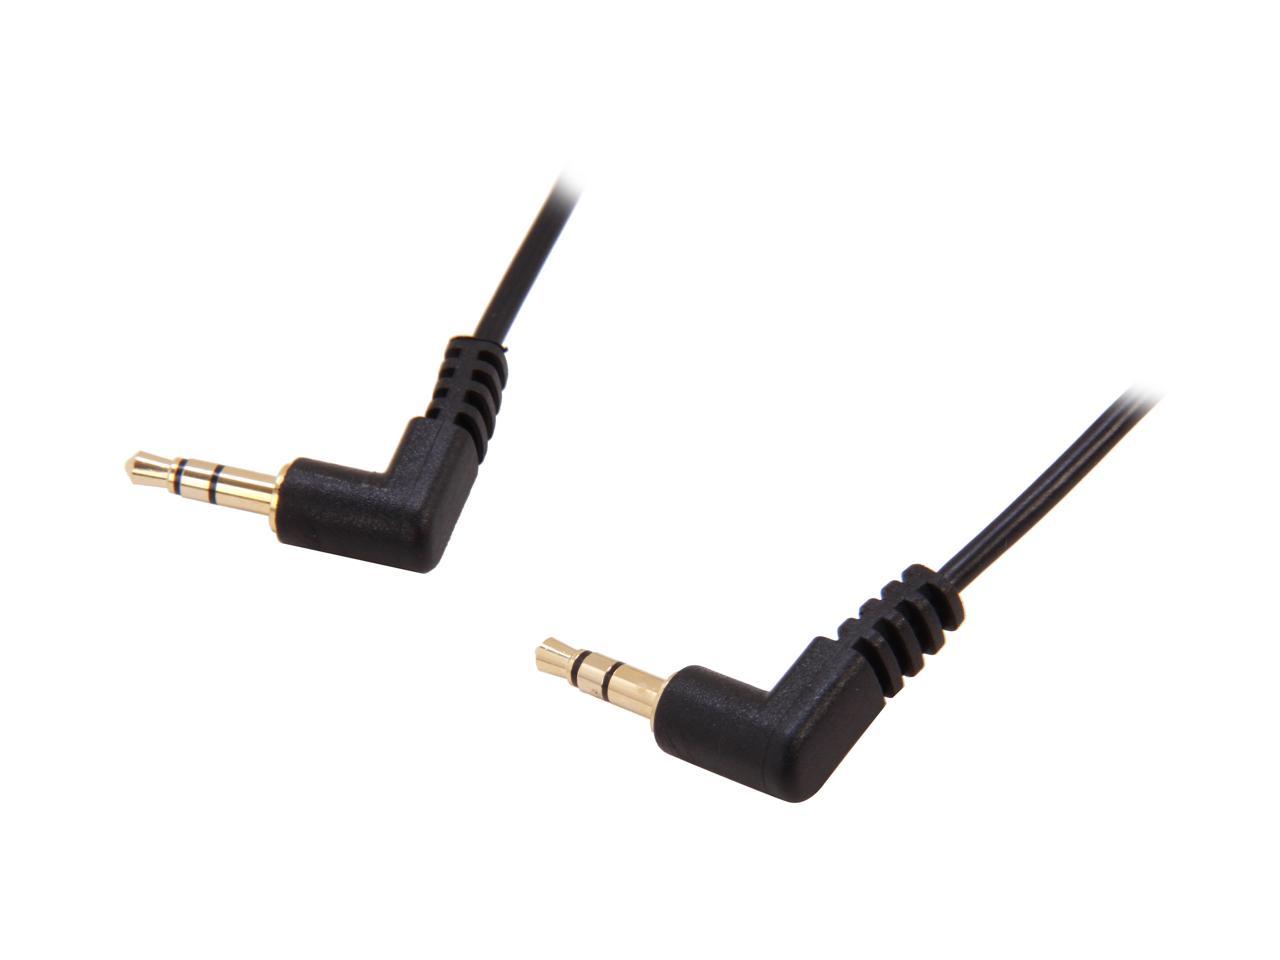 Male to M Stereo Audio Adapter Cable Startech MU3MMS2RA 3.5mm 6' Straight Cord 